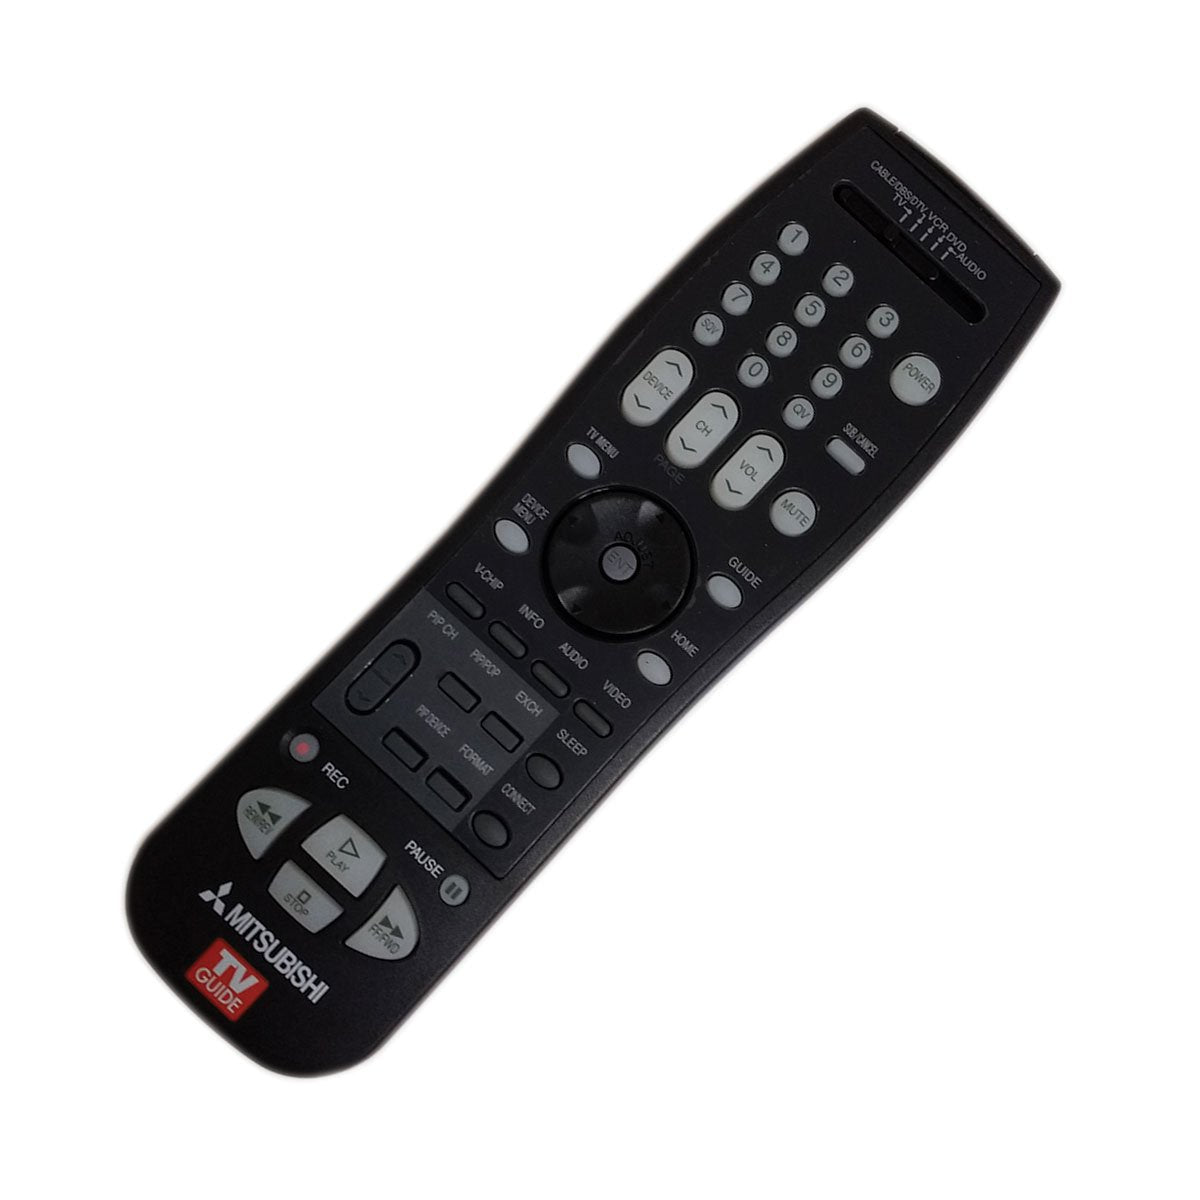 Ness Electronics, Inc, Brand New Original Mitsubishi 290P123020, Replacement Remote for WD52528 WD62628 WD73727 WD62827 WD52825G